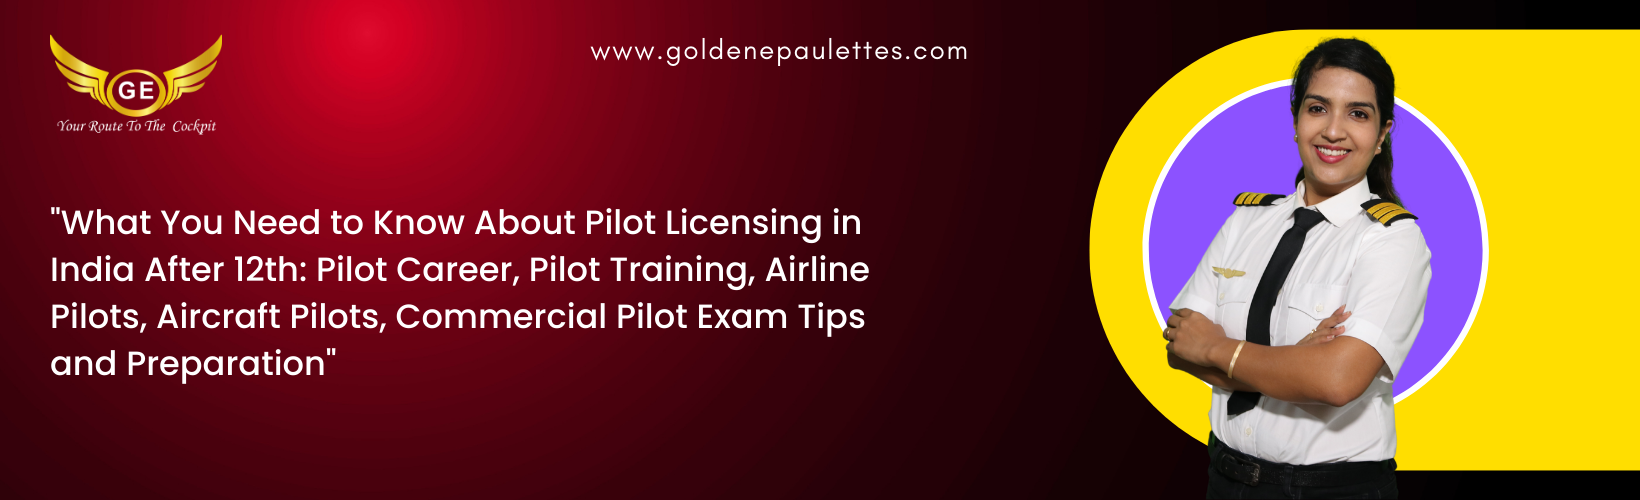 What You Need to Know About Pilot Licensing in India After 12th